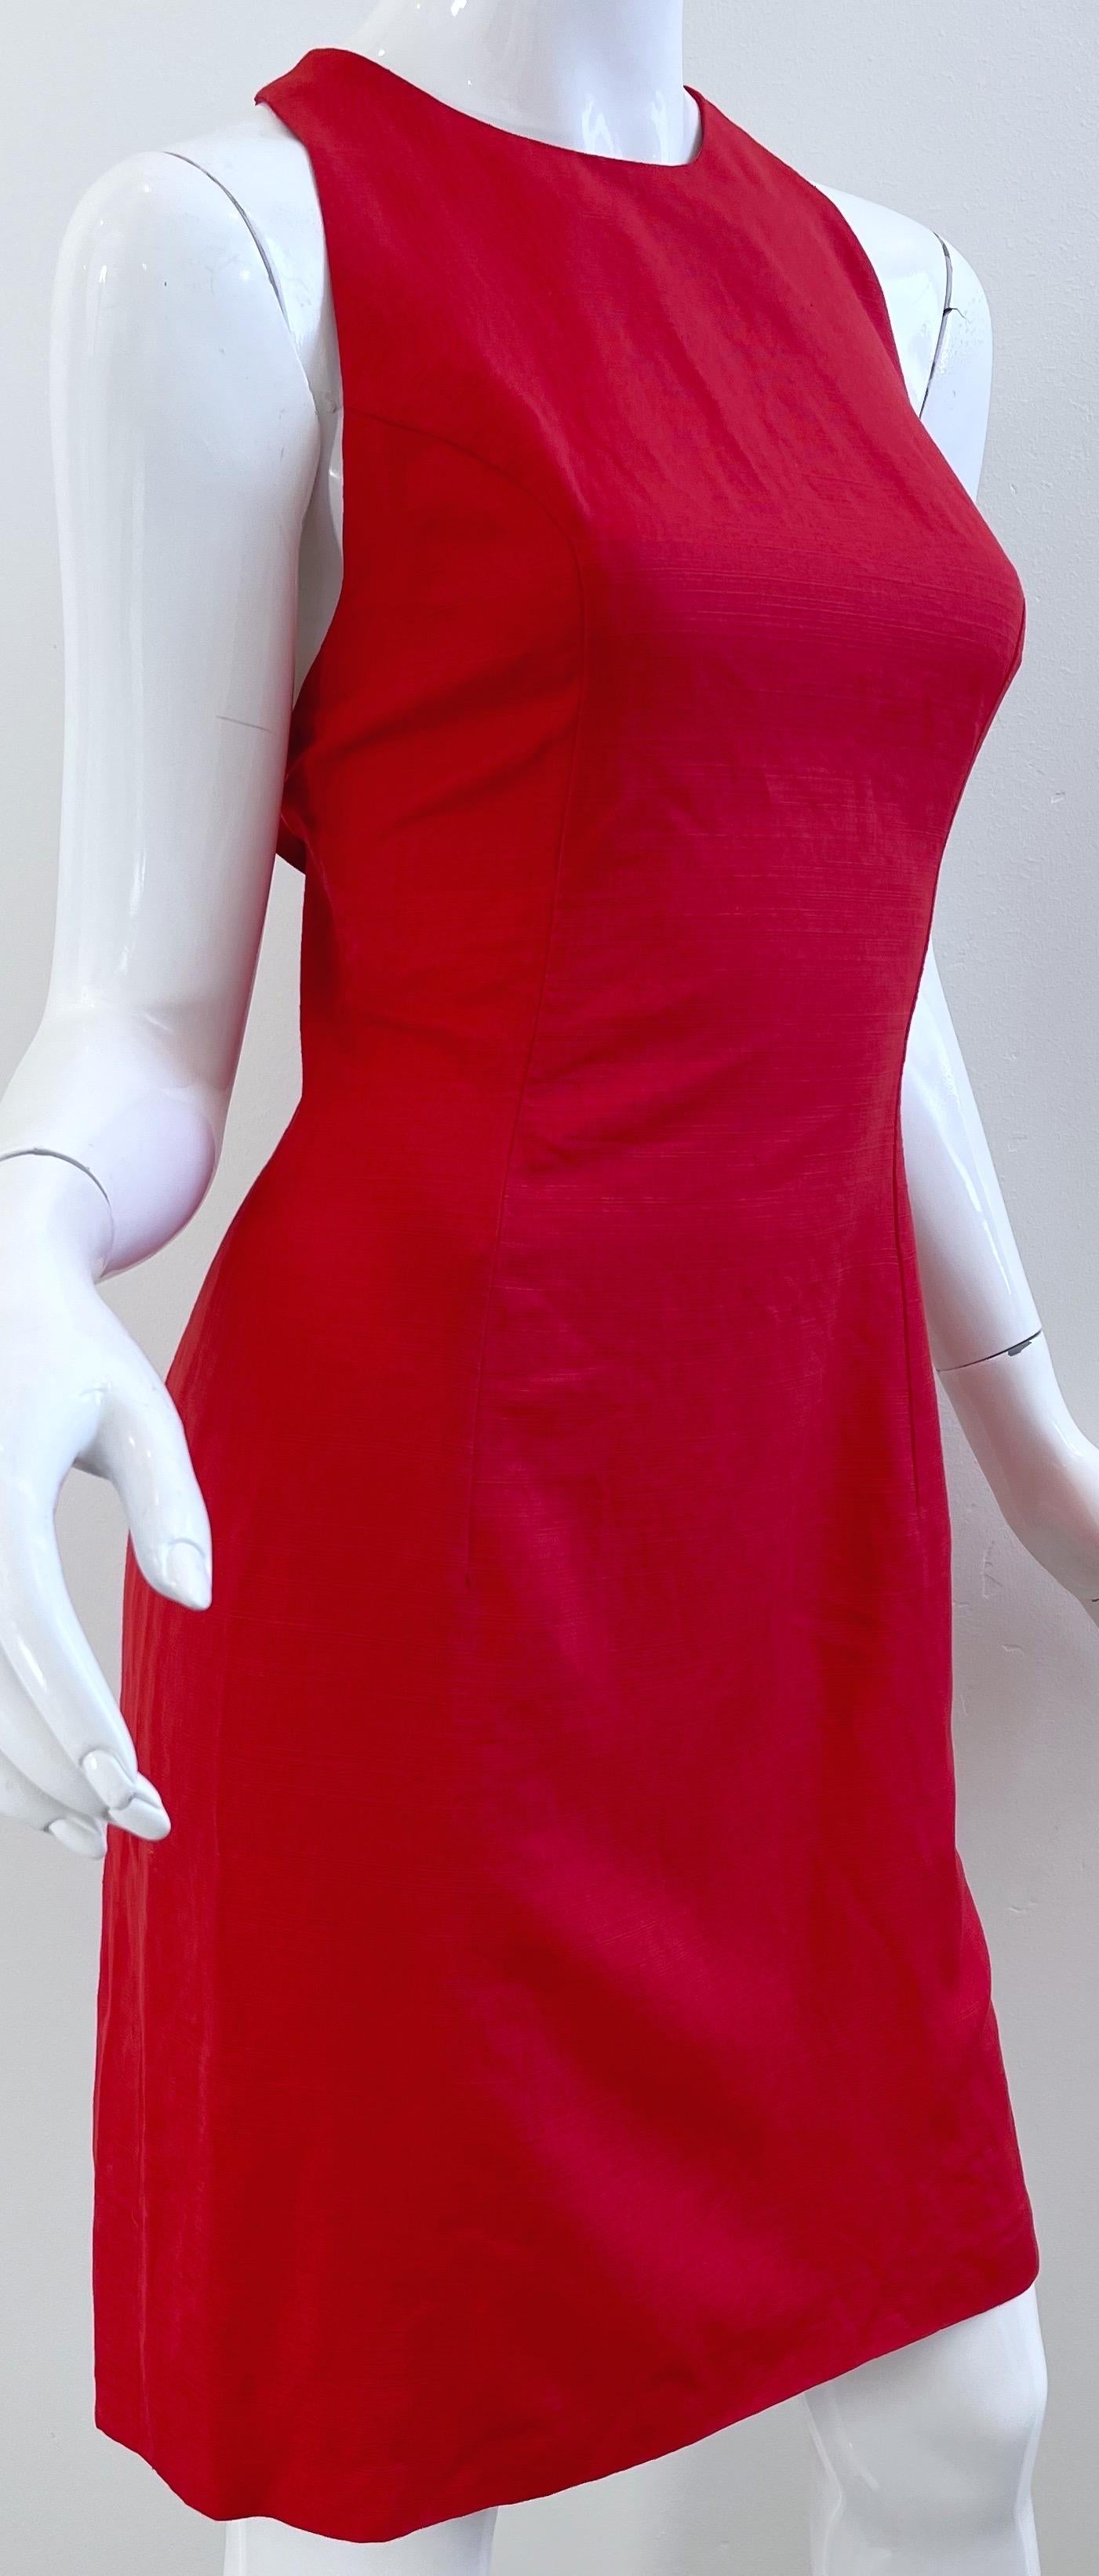 Valentino 1990s Size 4 Lipstick Red Linen + Rayon Halter Criss Cross 90s Dress In Excellent Condition For Sale In San Diego, CA